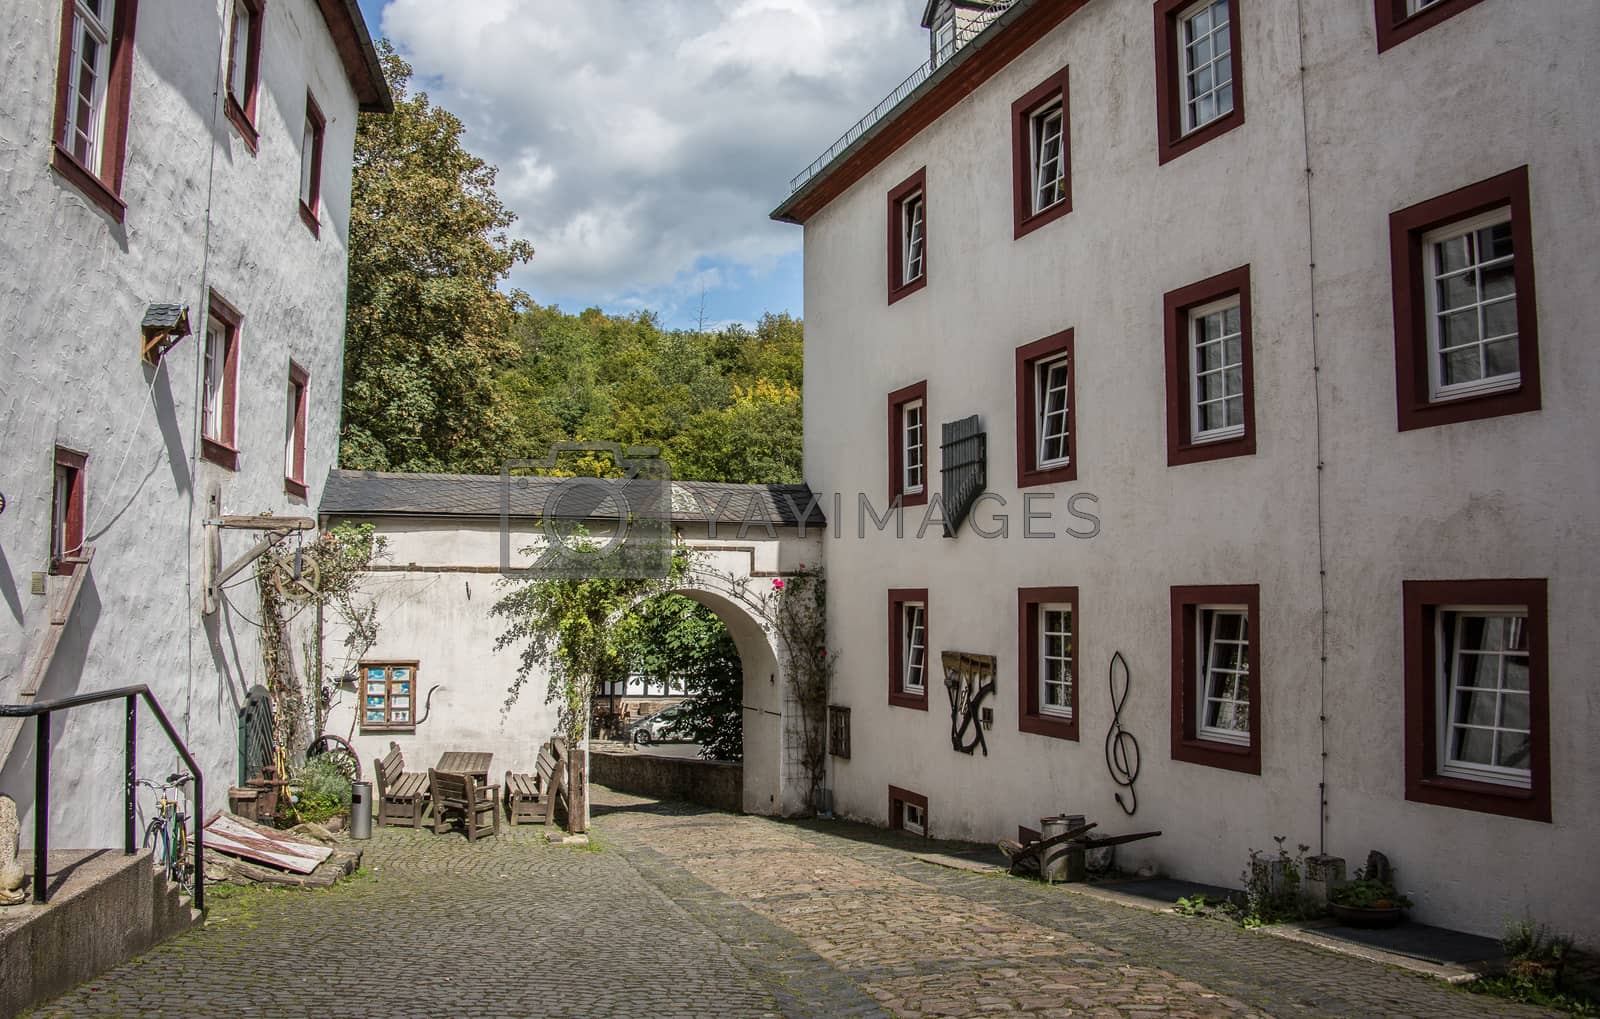 Royalty free image of Bilstein Castle as a youth hostel by Dr-Lange